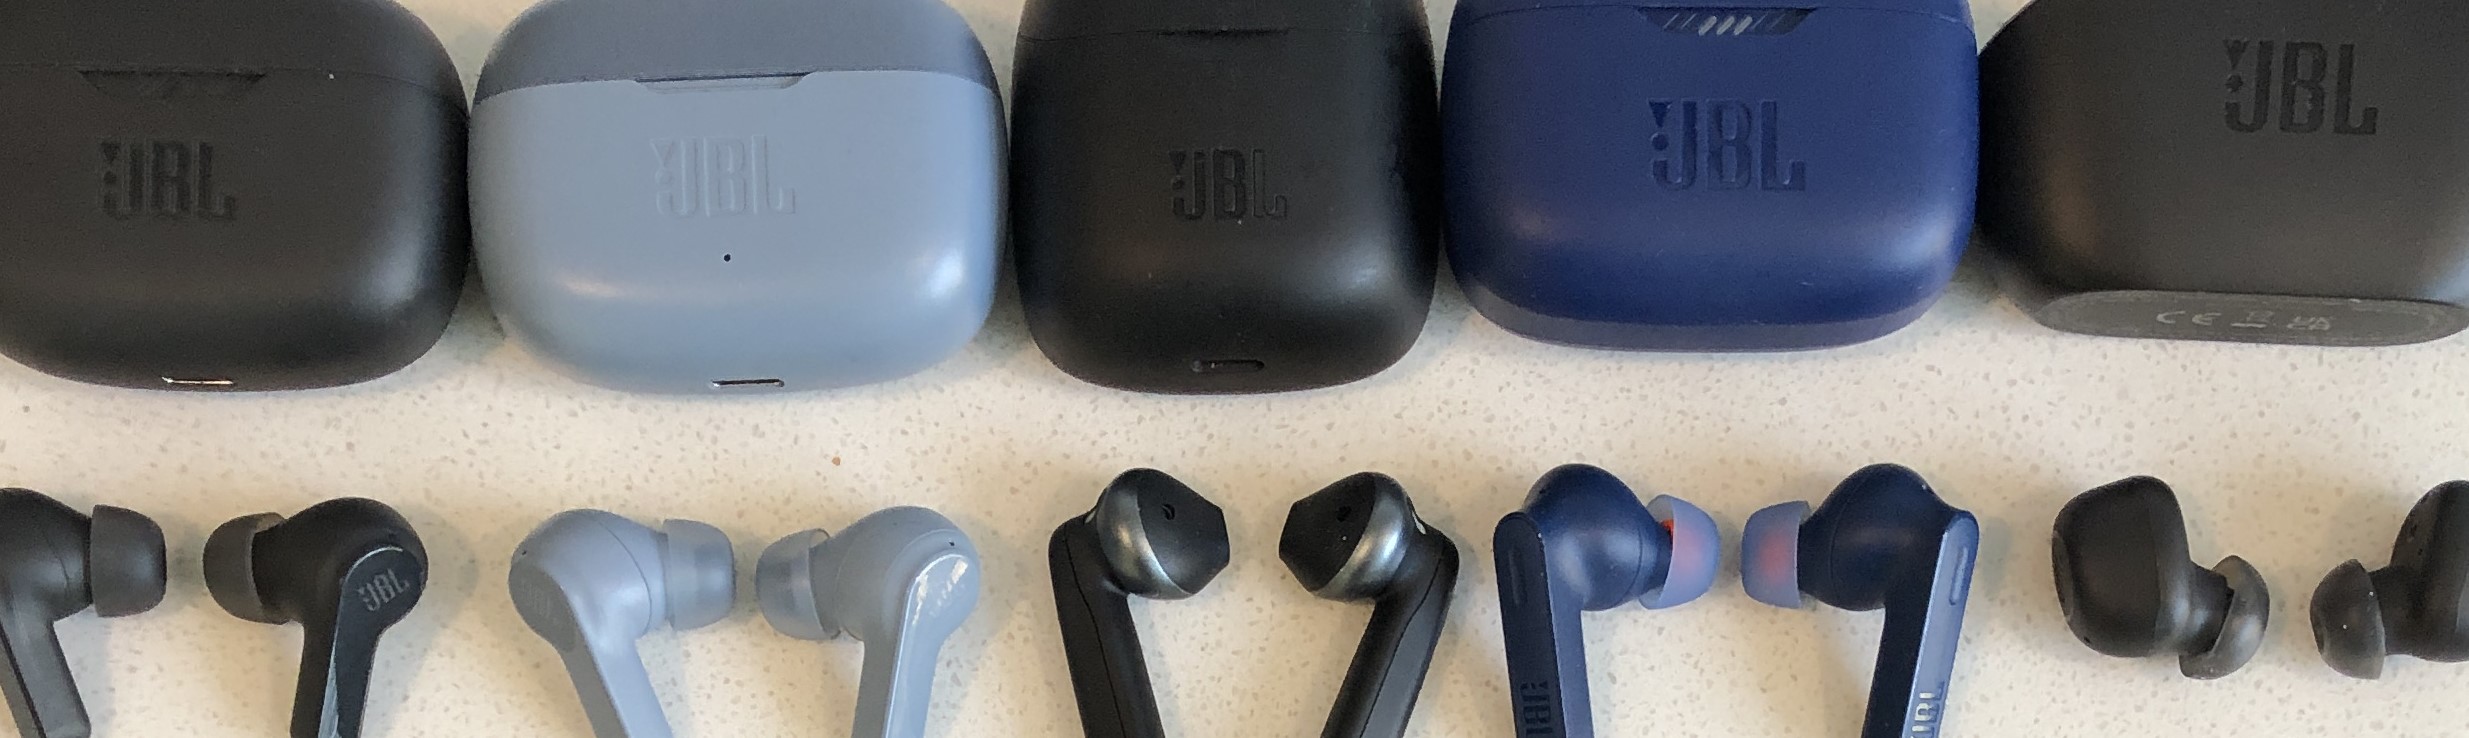 JBL wireless earbud collection